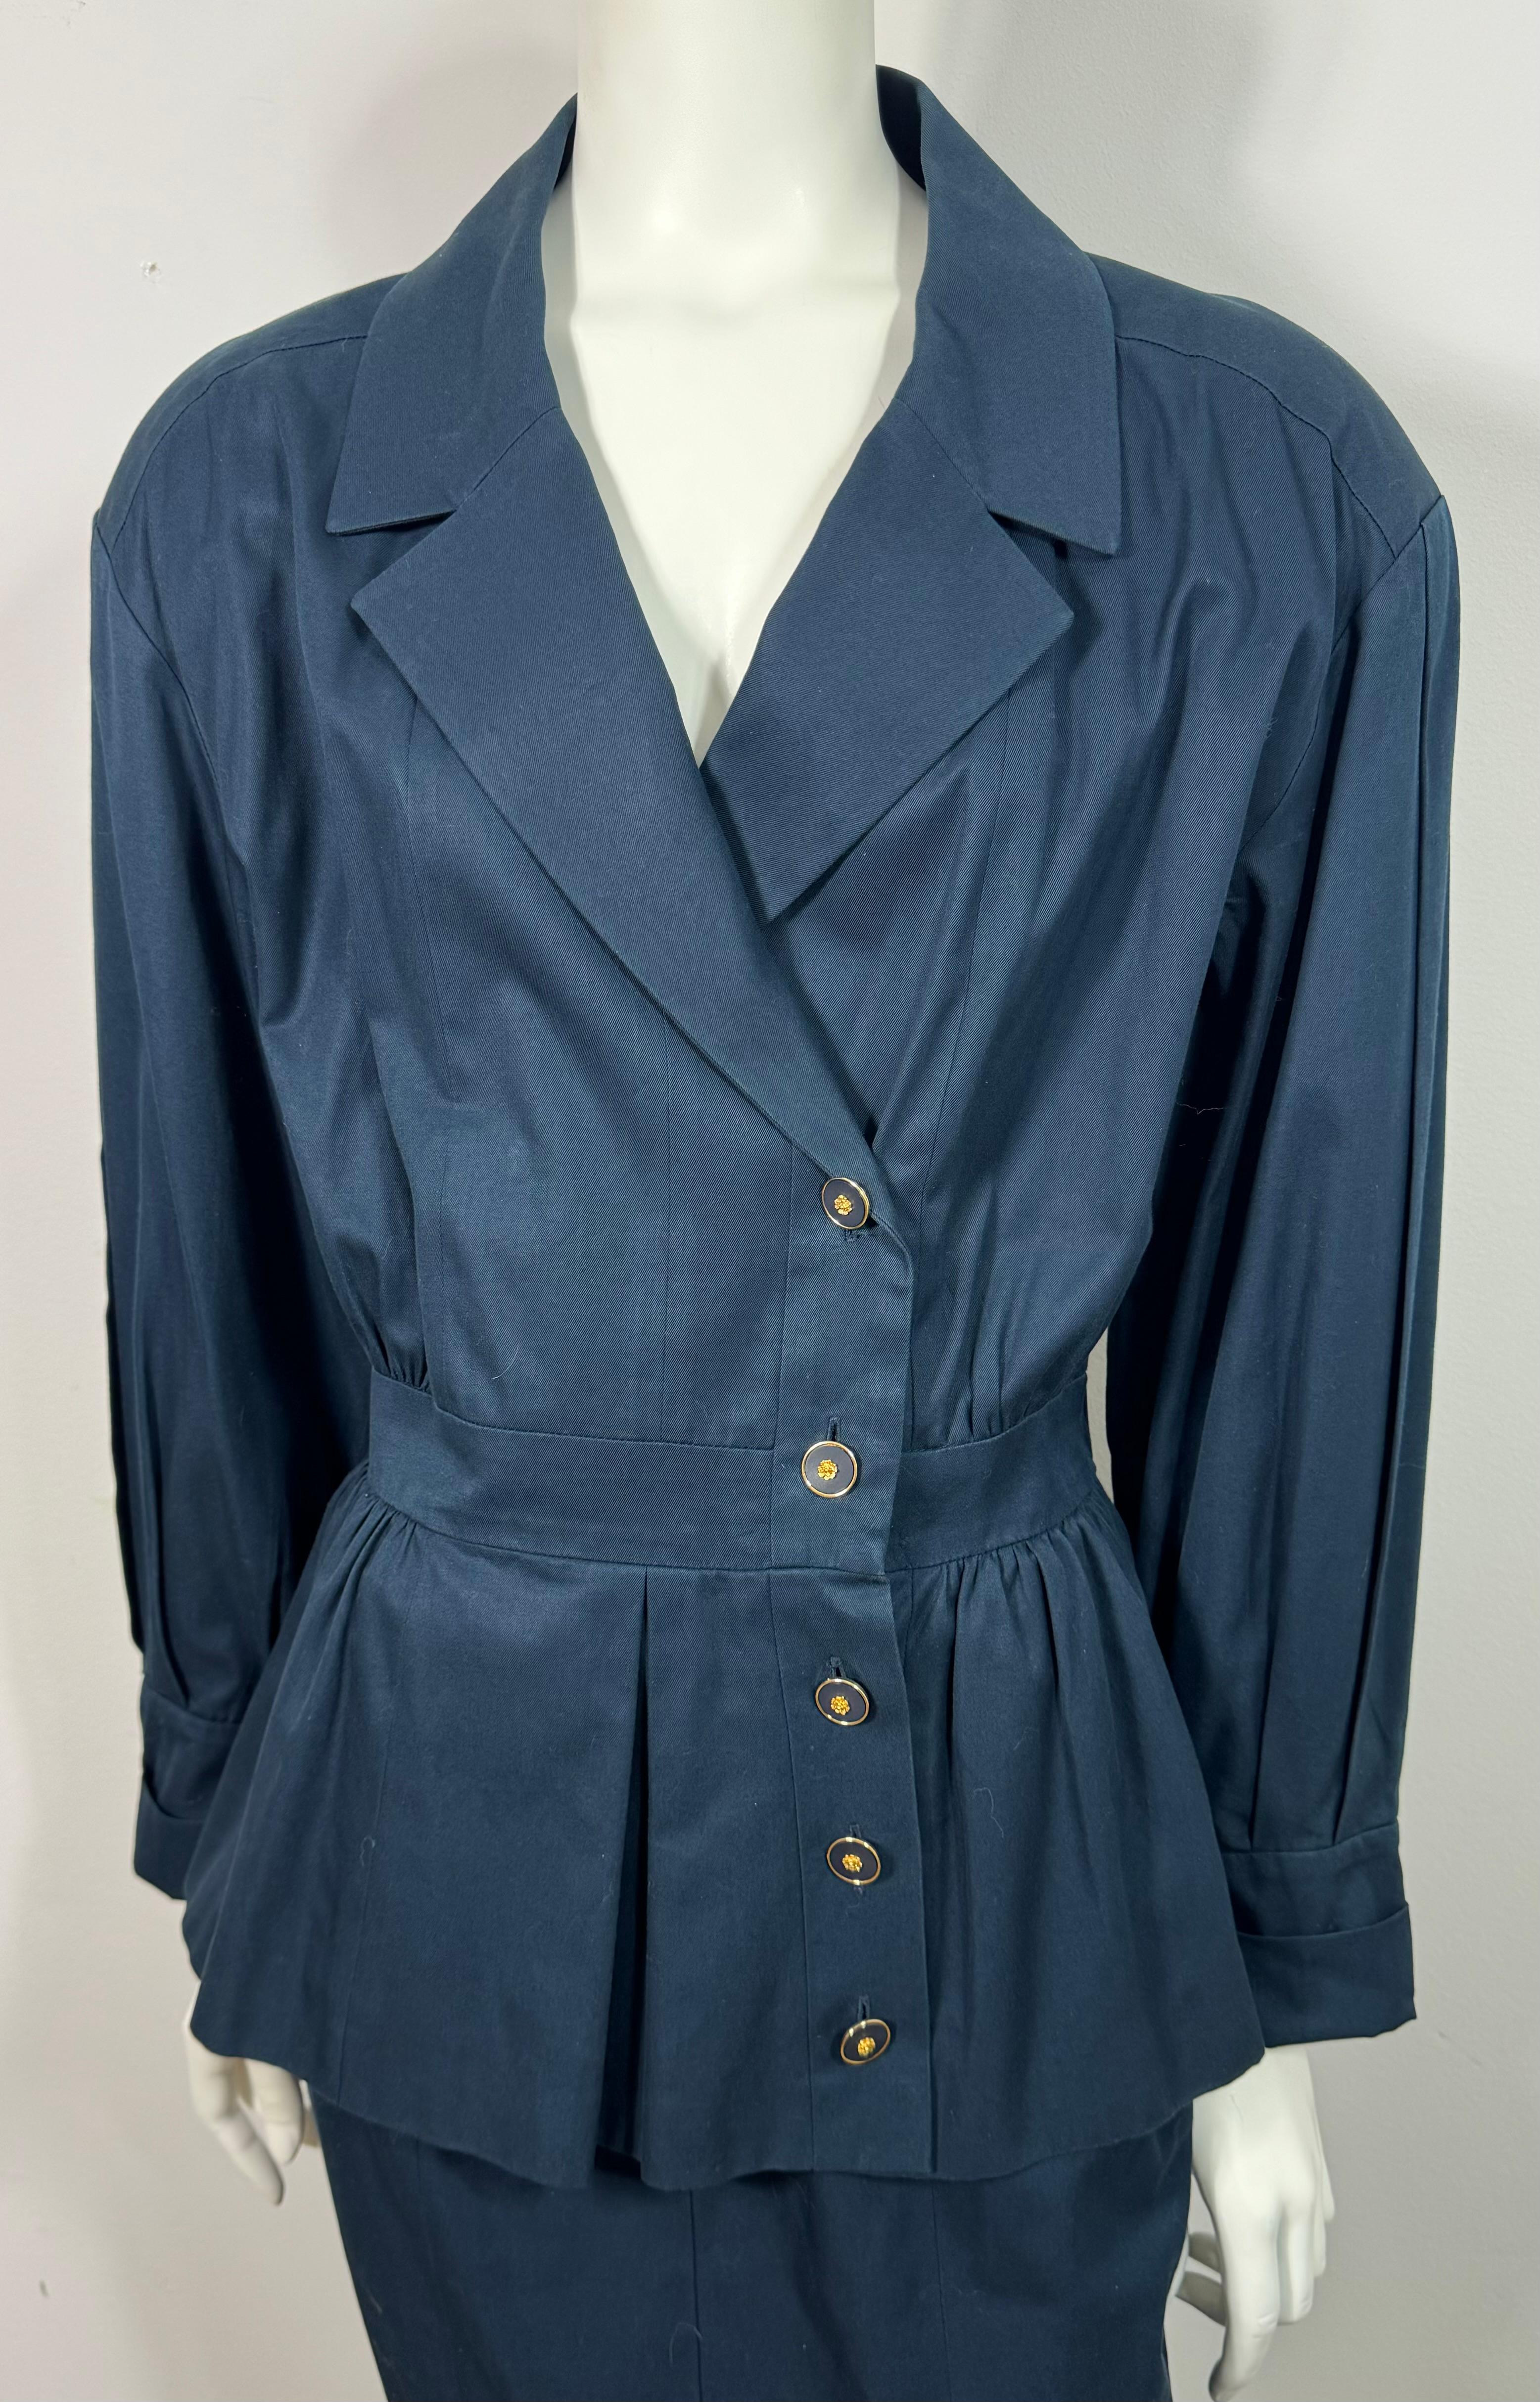 Chanel 1980's Navy Cotton Cinched Waist Jacket Skirt Suit - Size 38 For Sale 4